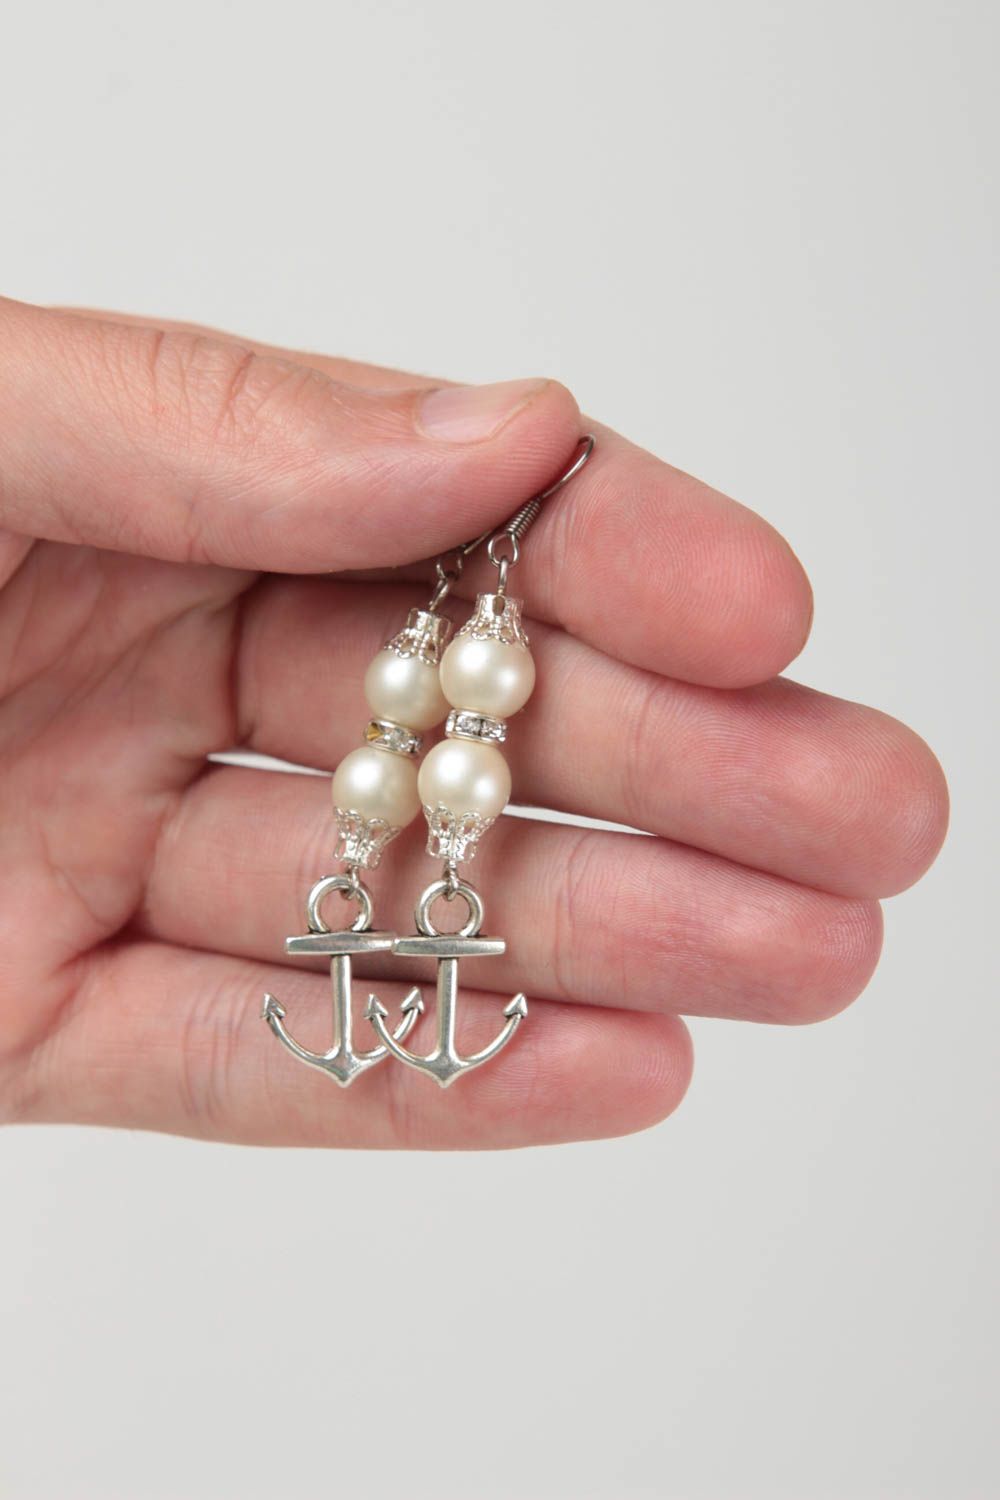 Handcrafted metal earrings with pearl beads designer jewelry gifts for her photo 5